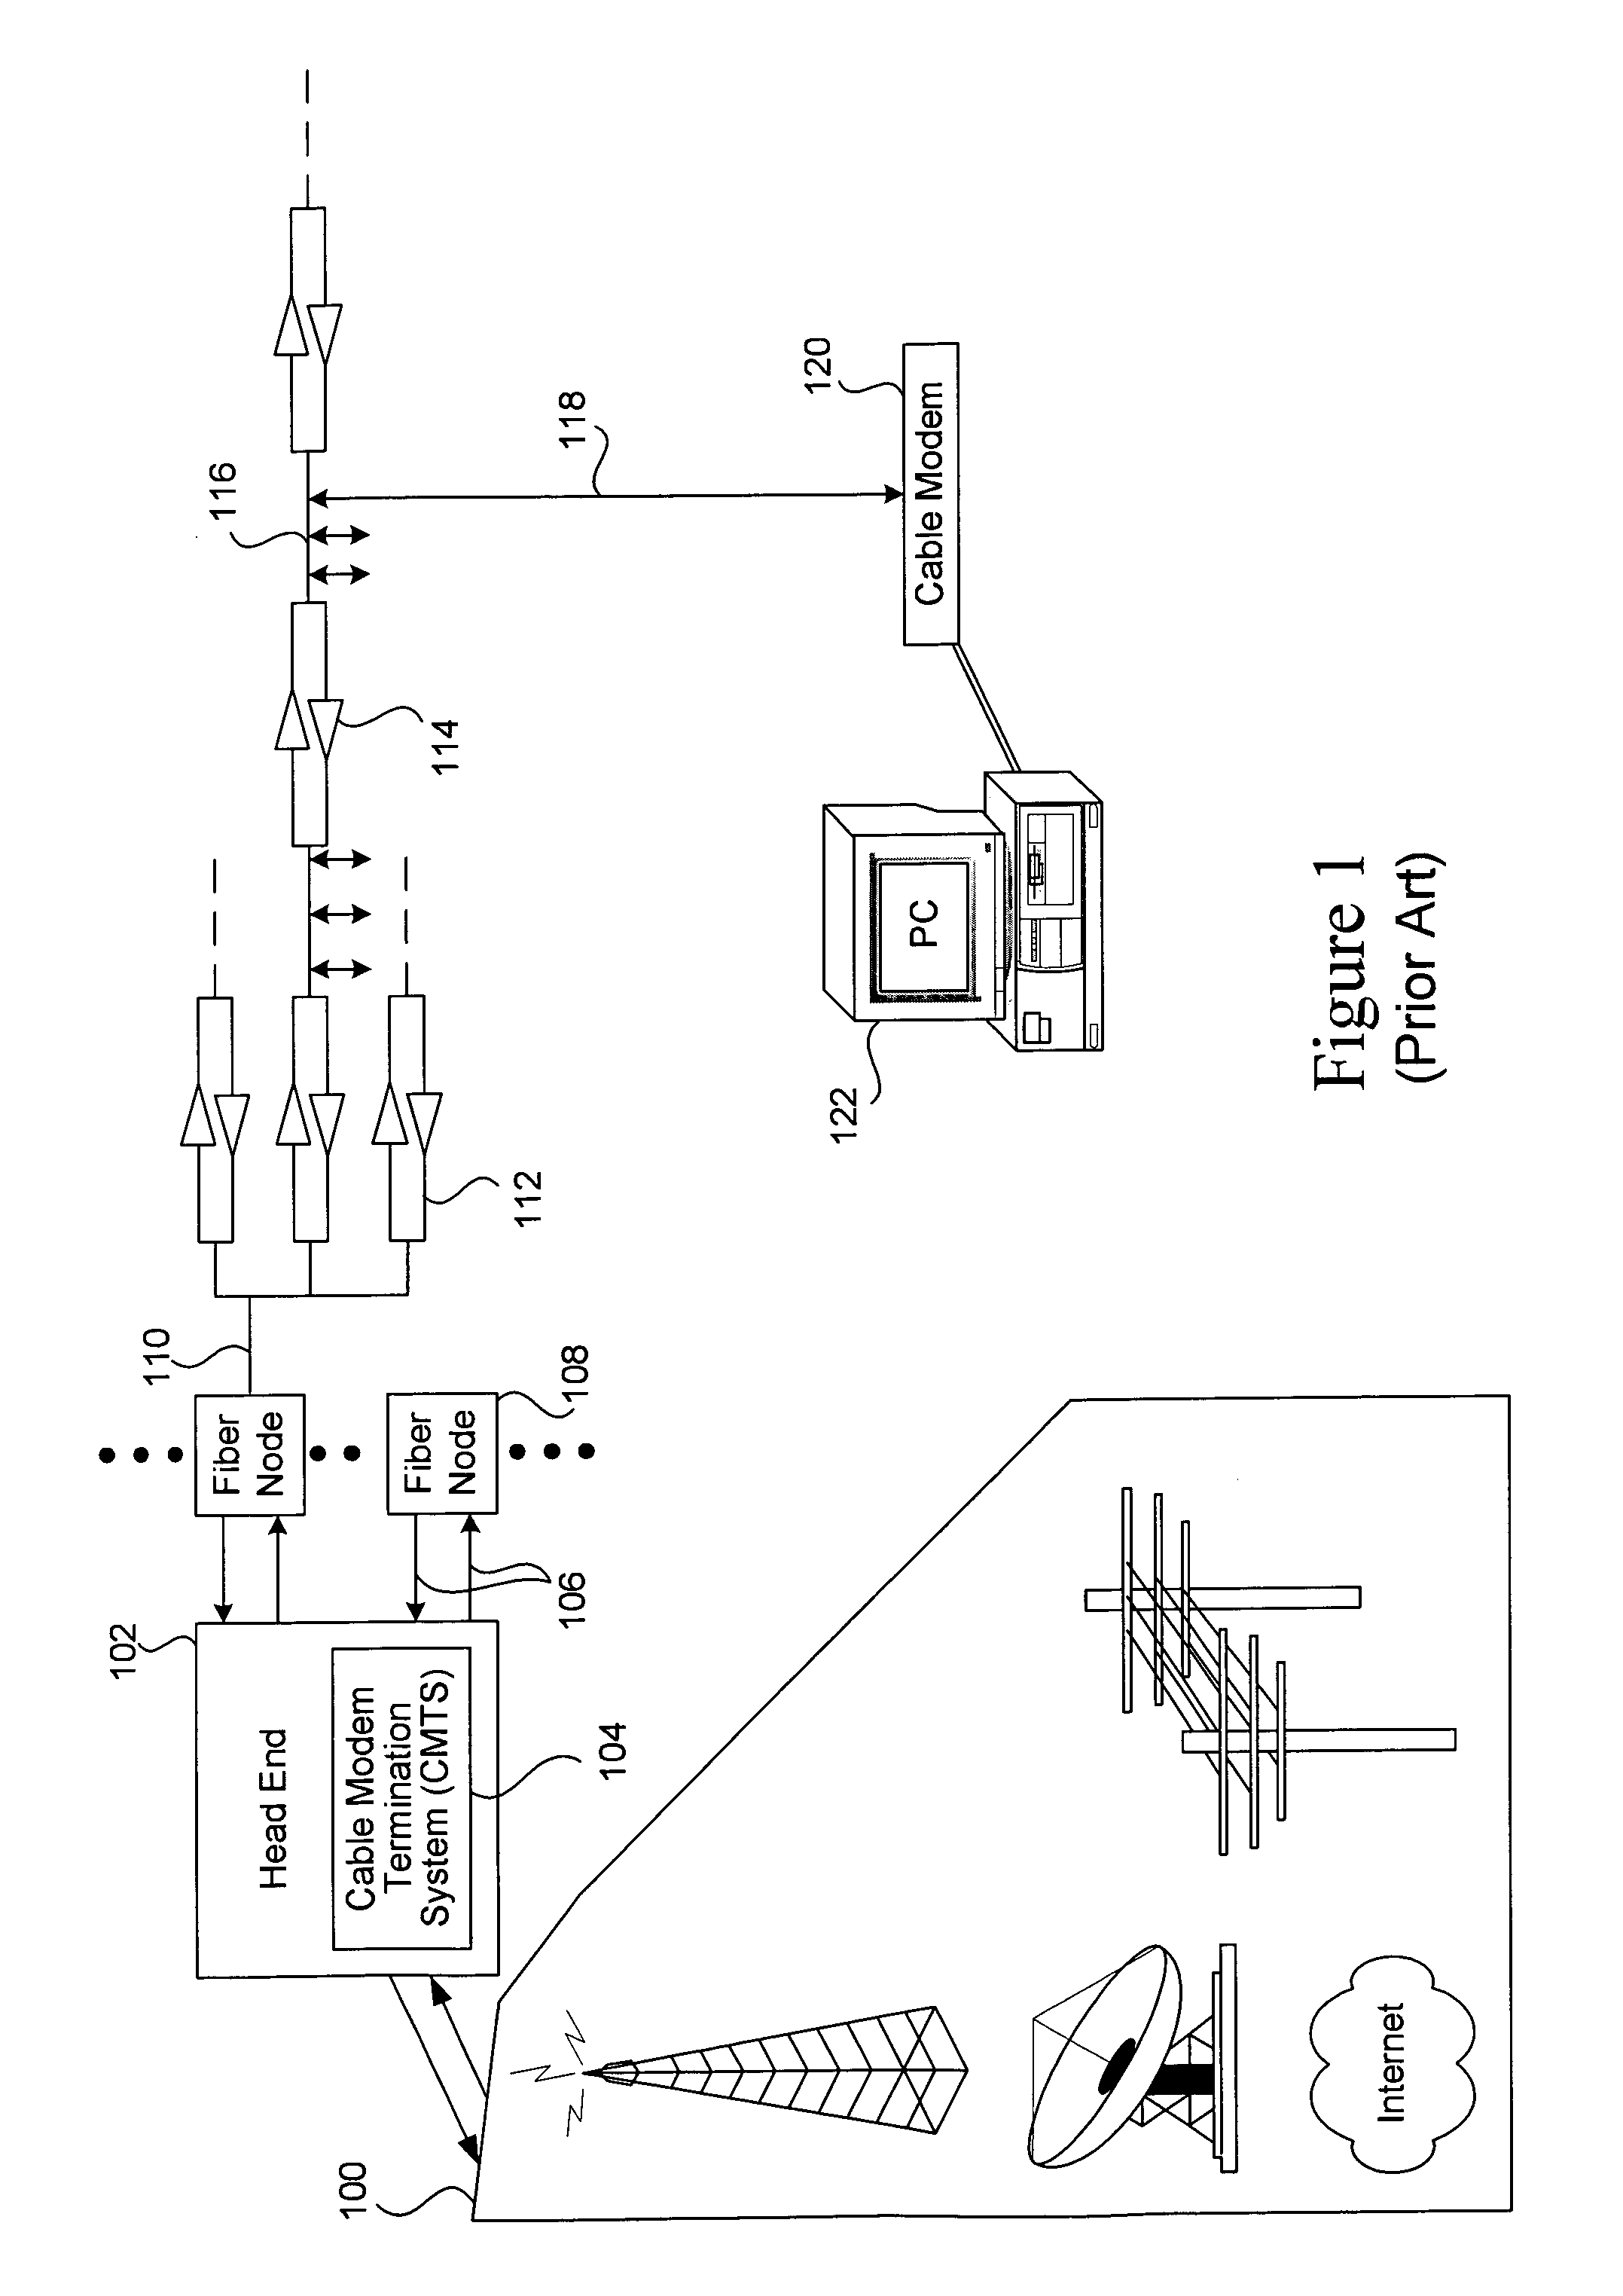 Method for a cable modem to rapidly switch to a backup CMTS